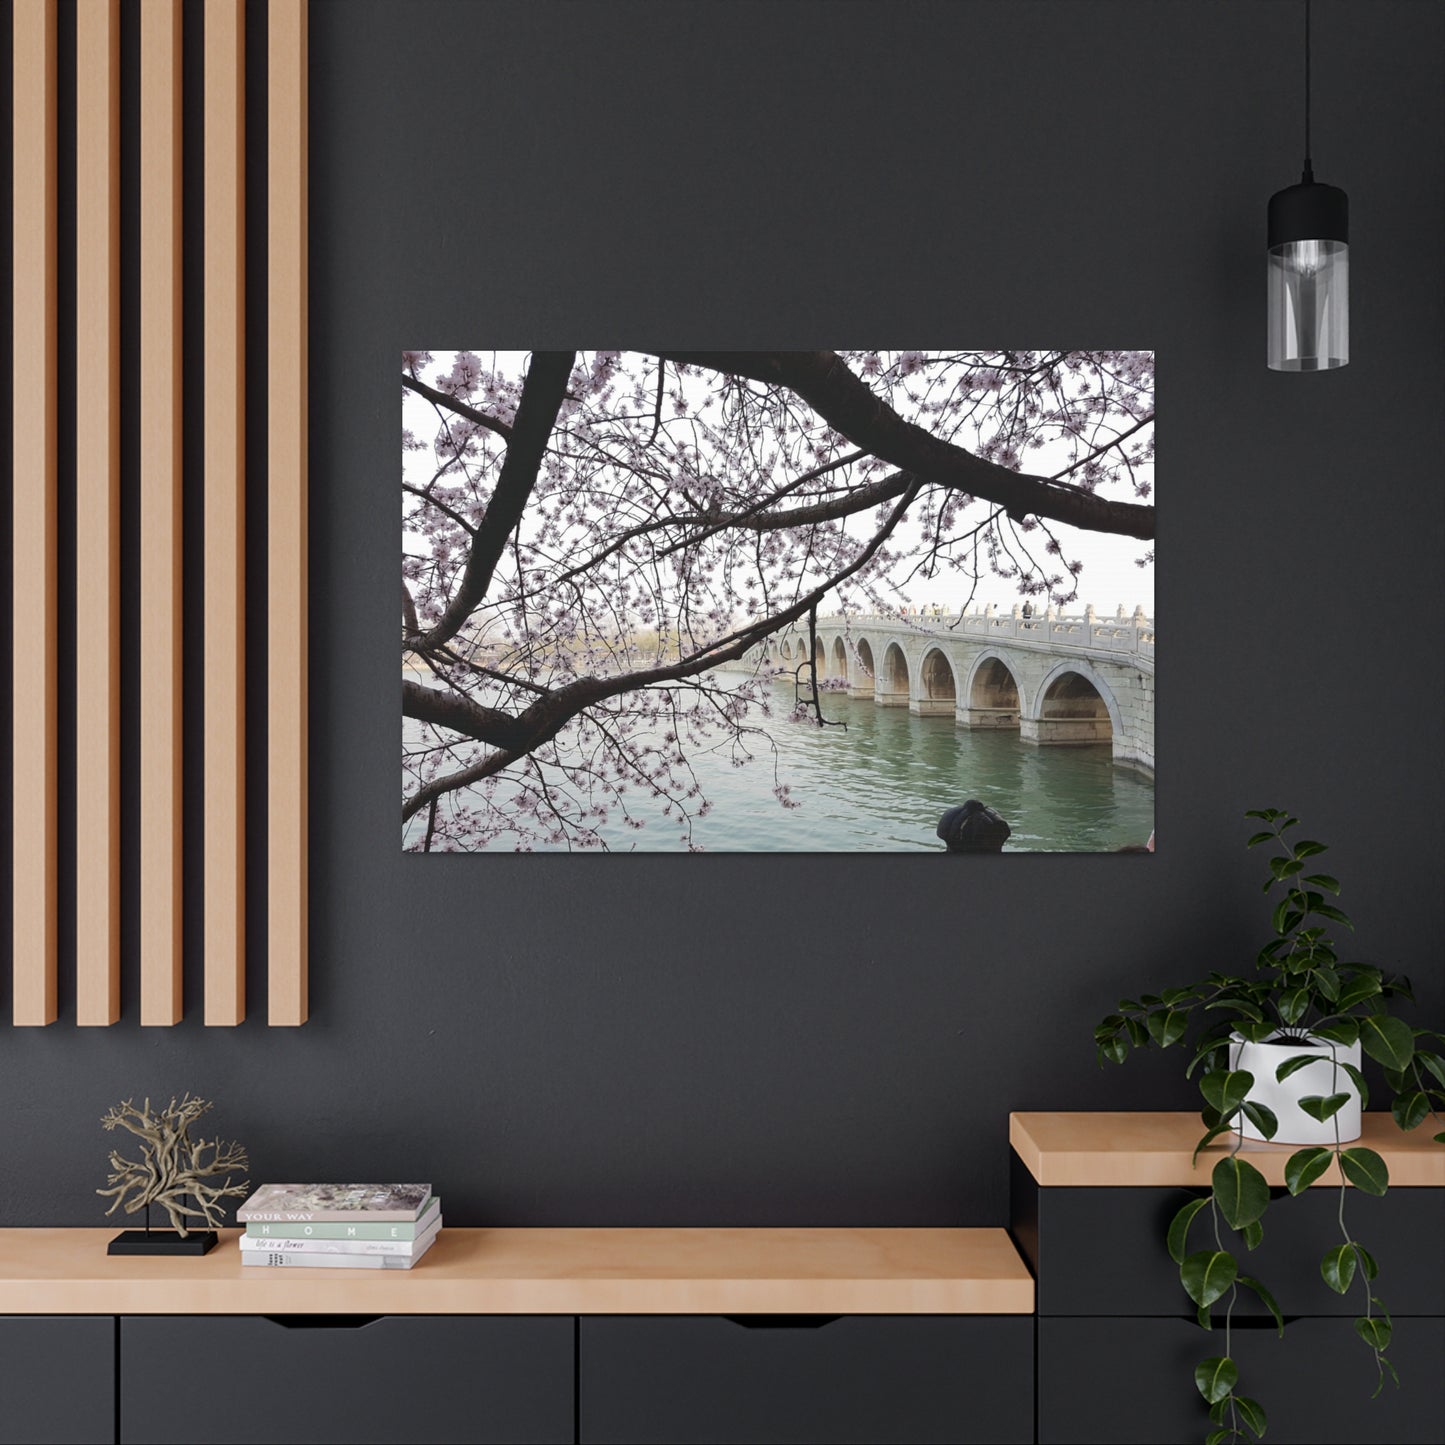 China-7 Canvas Gallery Wraps